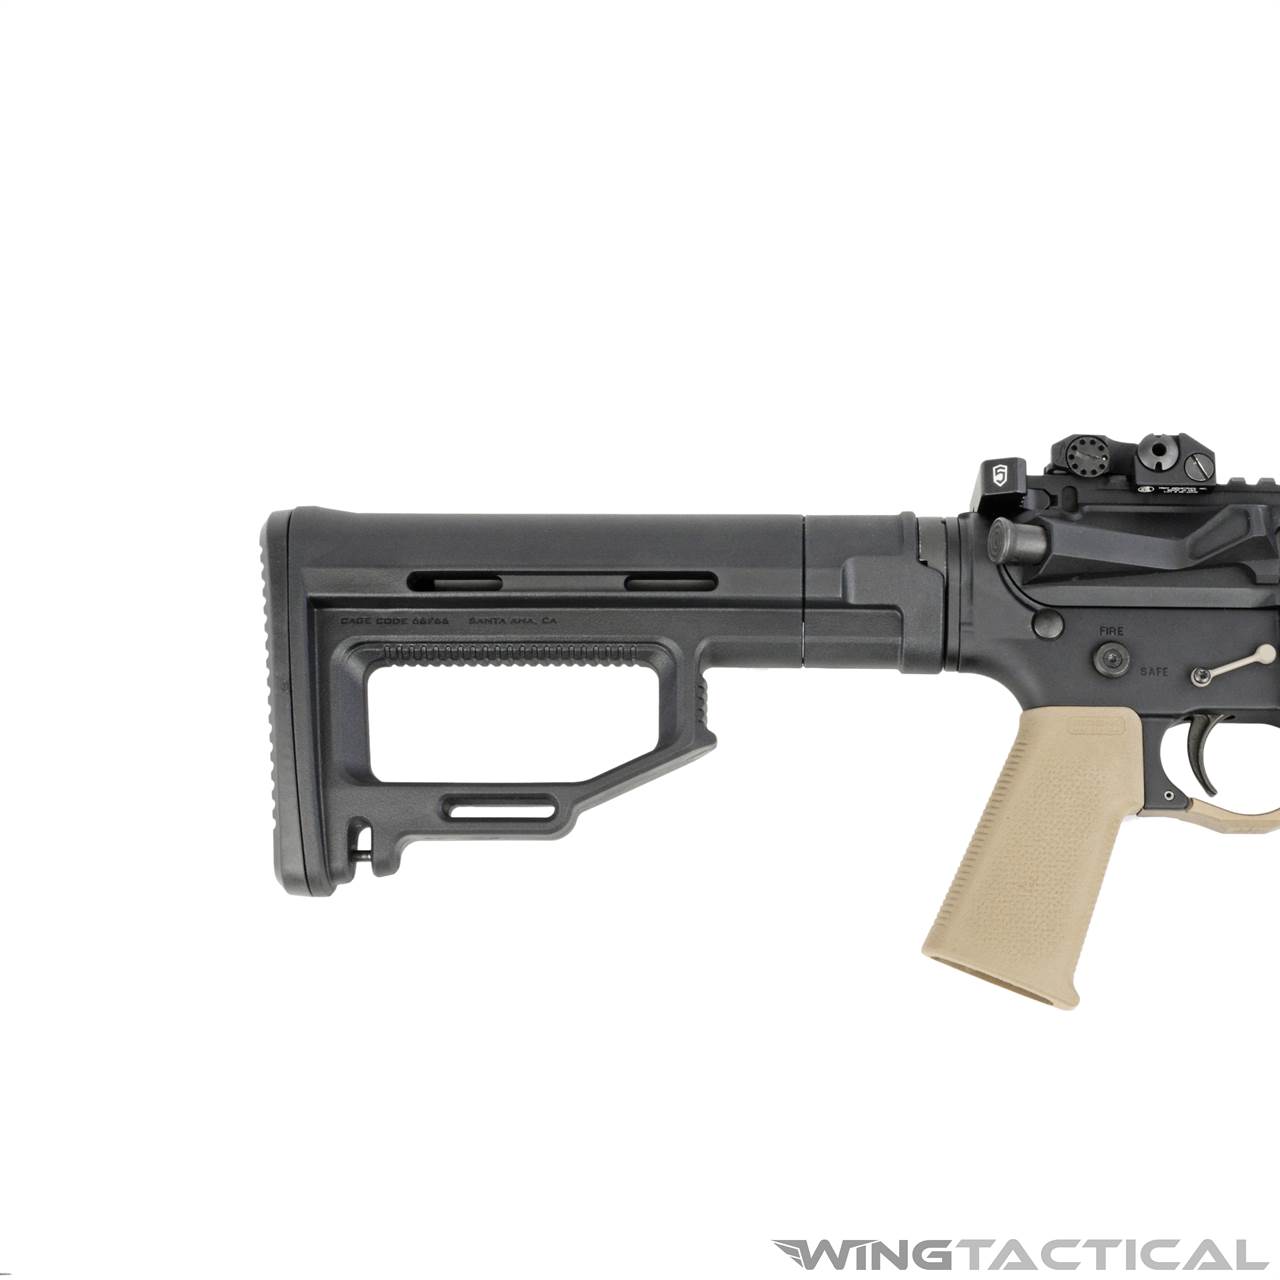 Strike Industries Viper Modular AR Fixed Stock | Wing Tactical